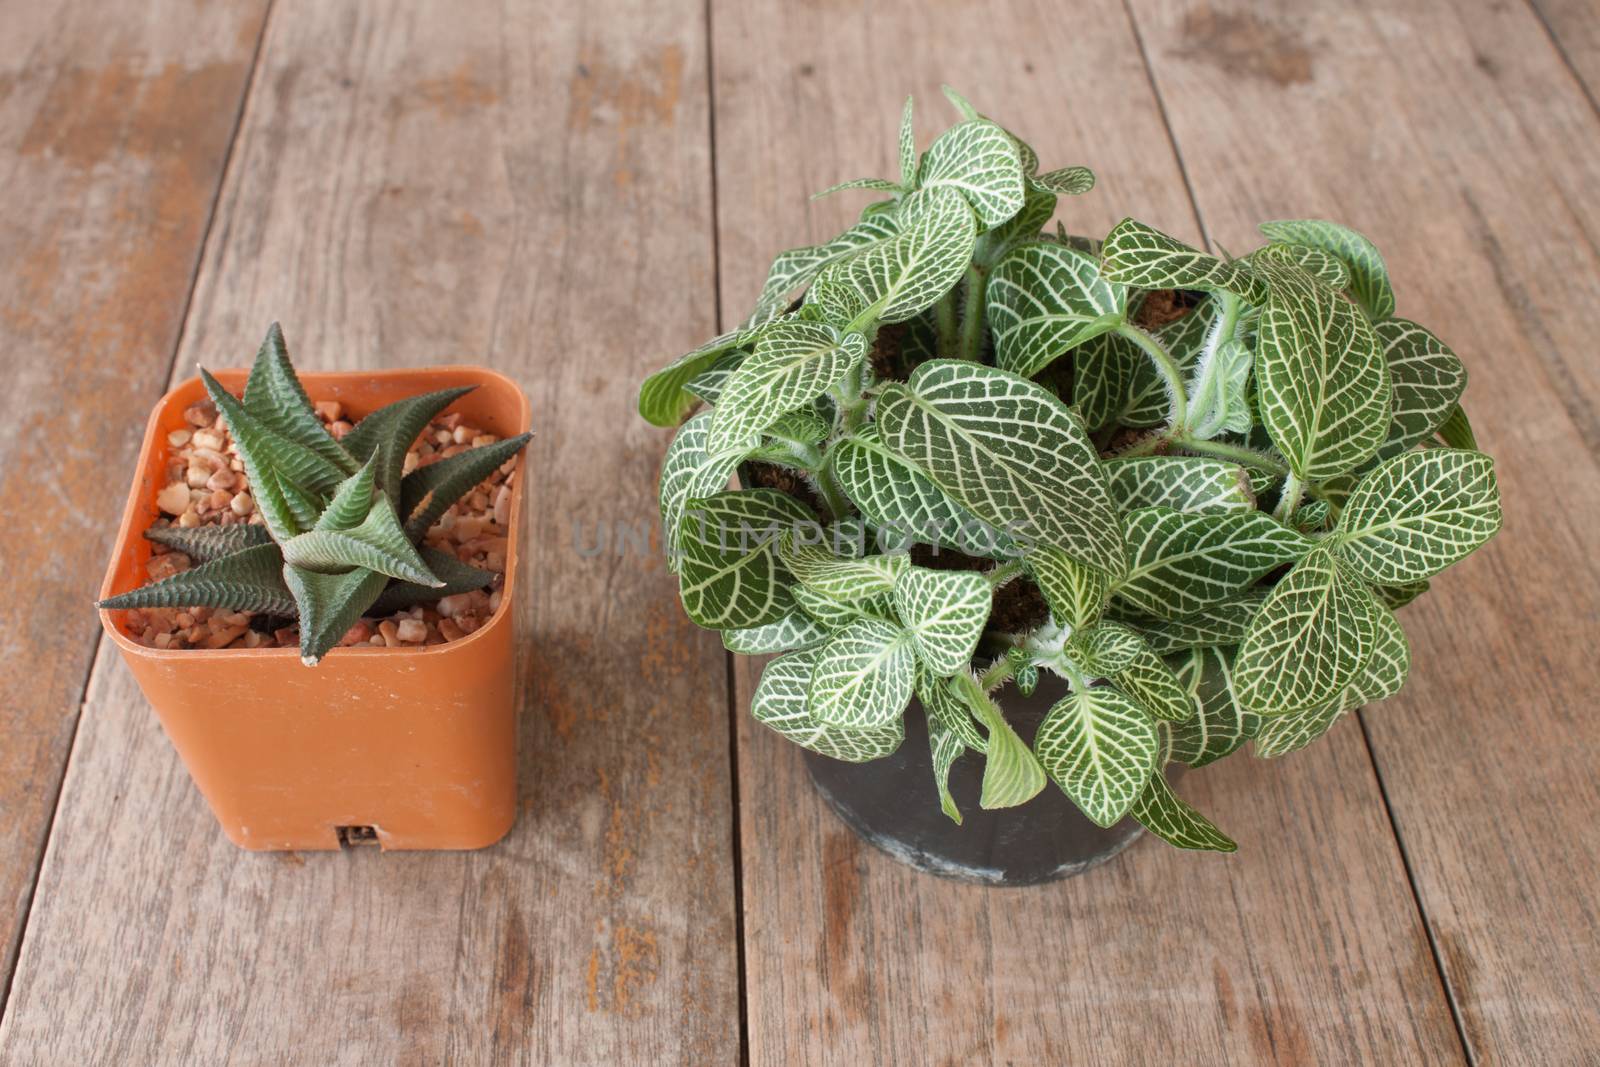 Fittonia  tree and  Dyckia tree  Set on a wooden floor